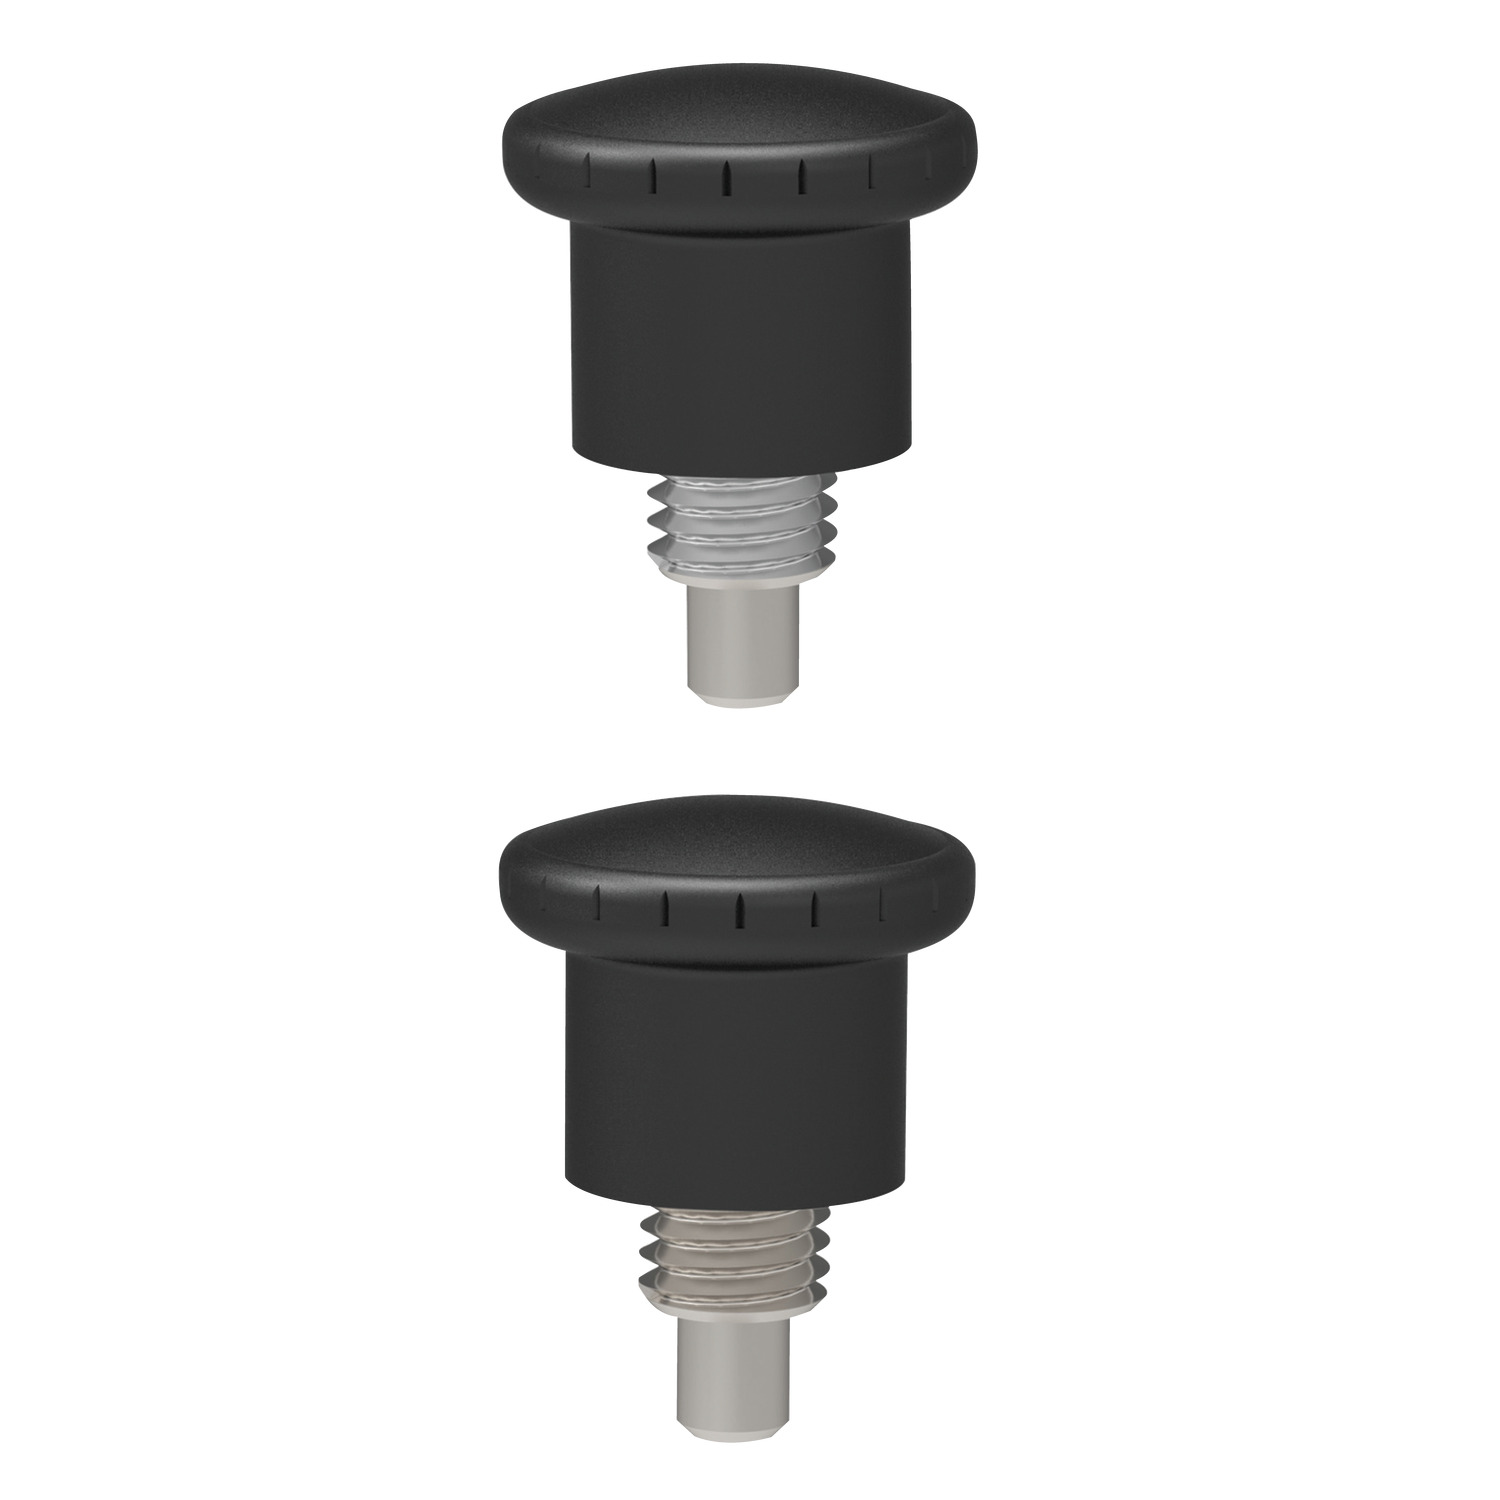 Index Plungers - Pull Grip Coarse threaded mini index plunger, available in stainless steel or free cutting galvanised steel. Particularly suited for use on sheet metal assemblies; e.g Shopfitting displays.